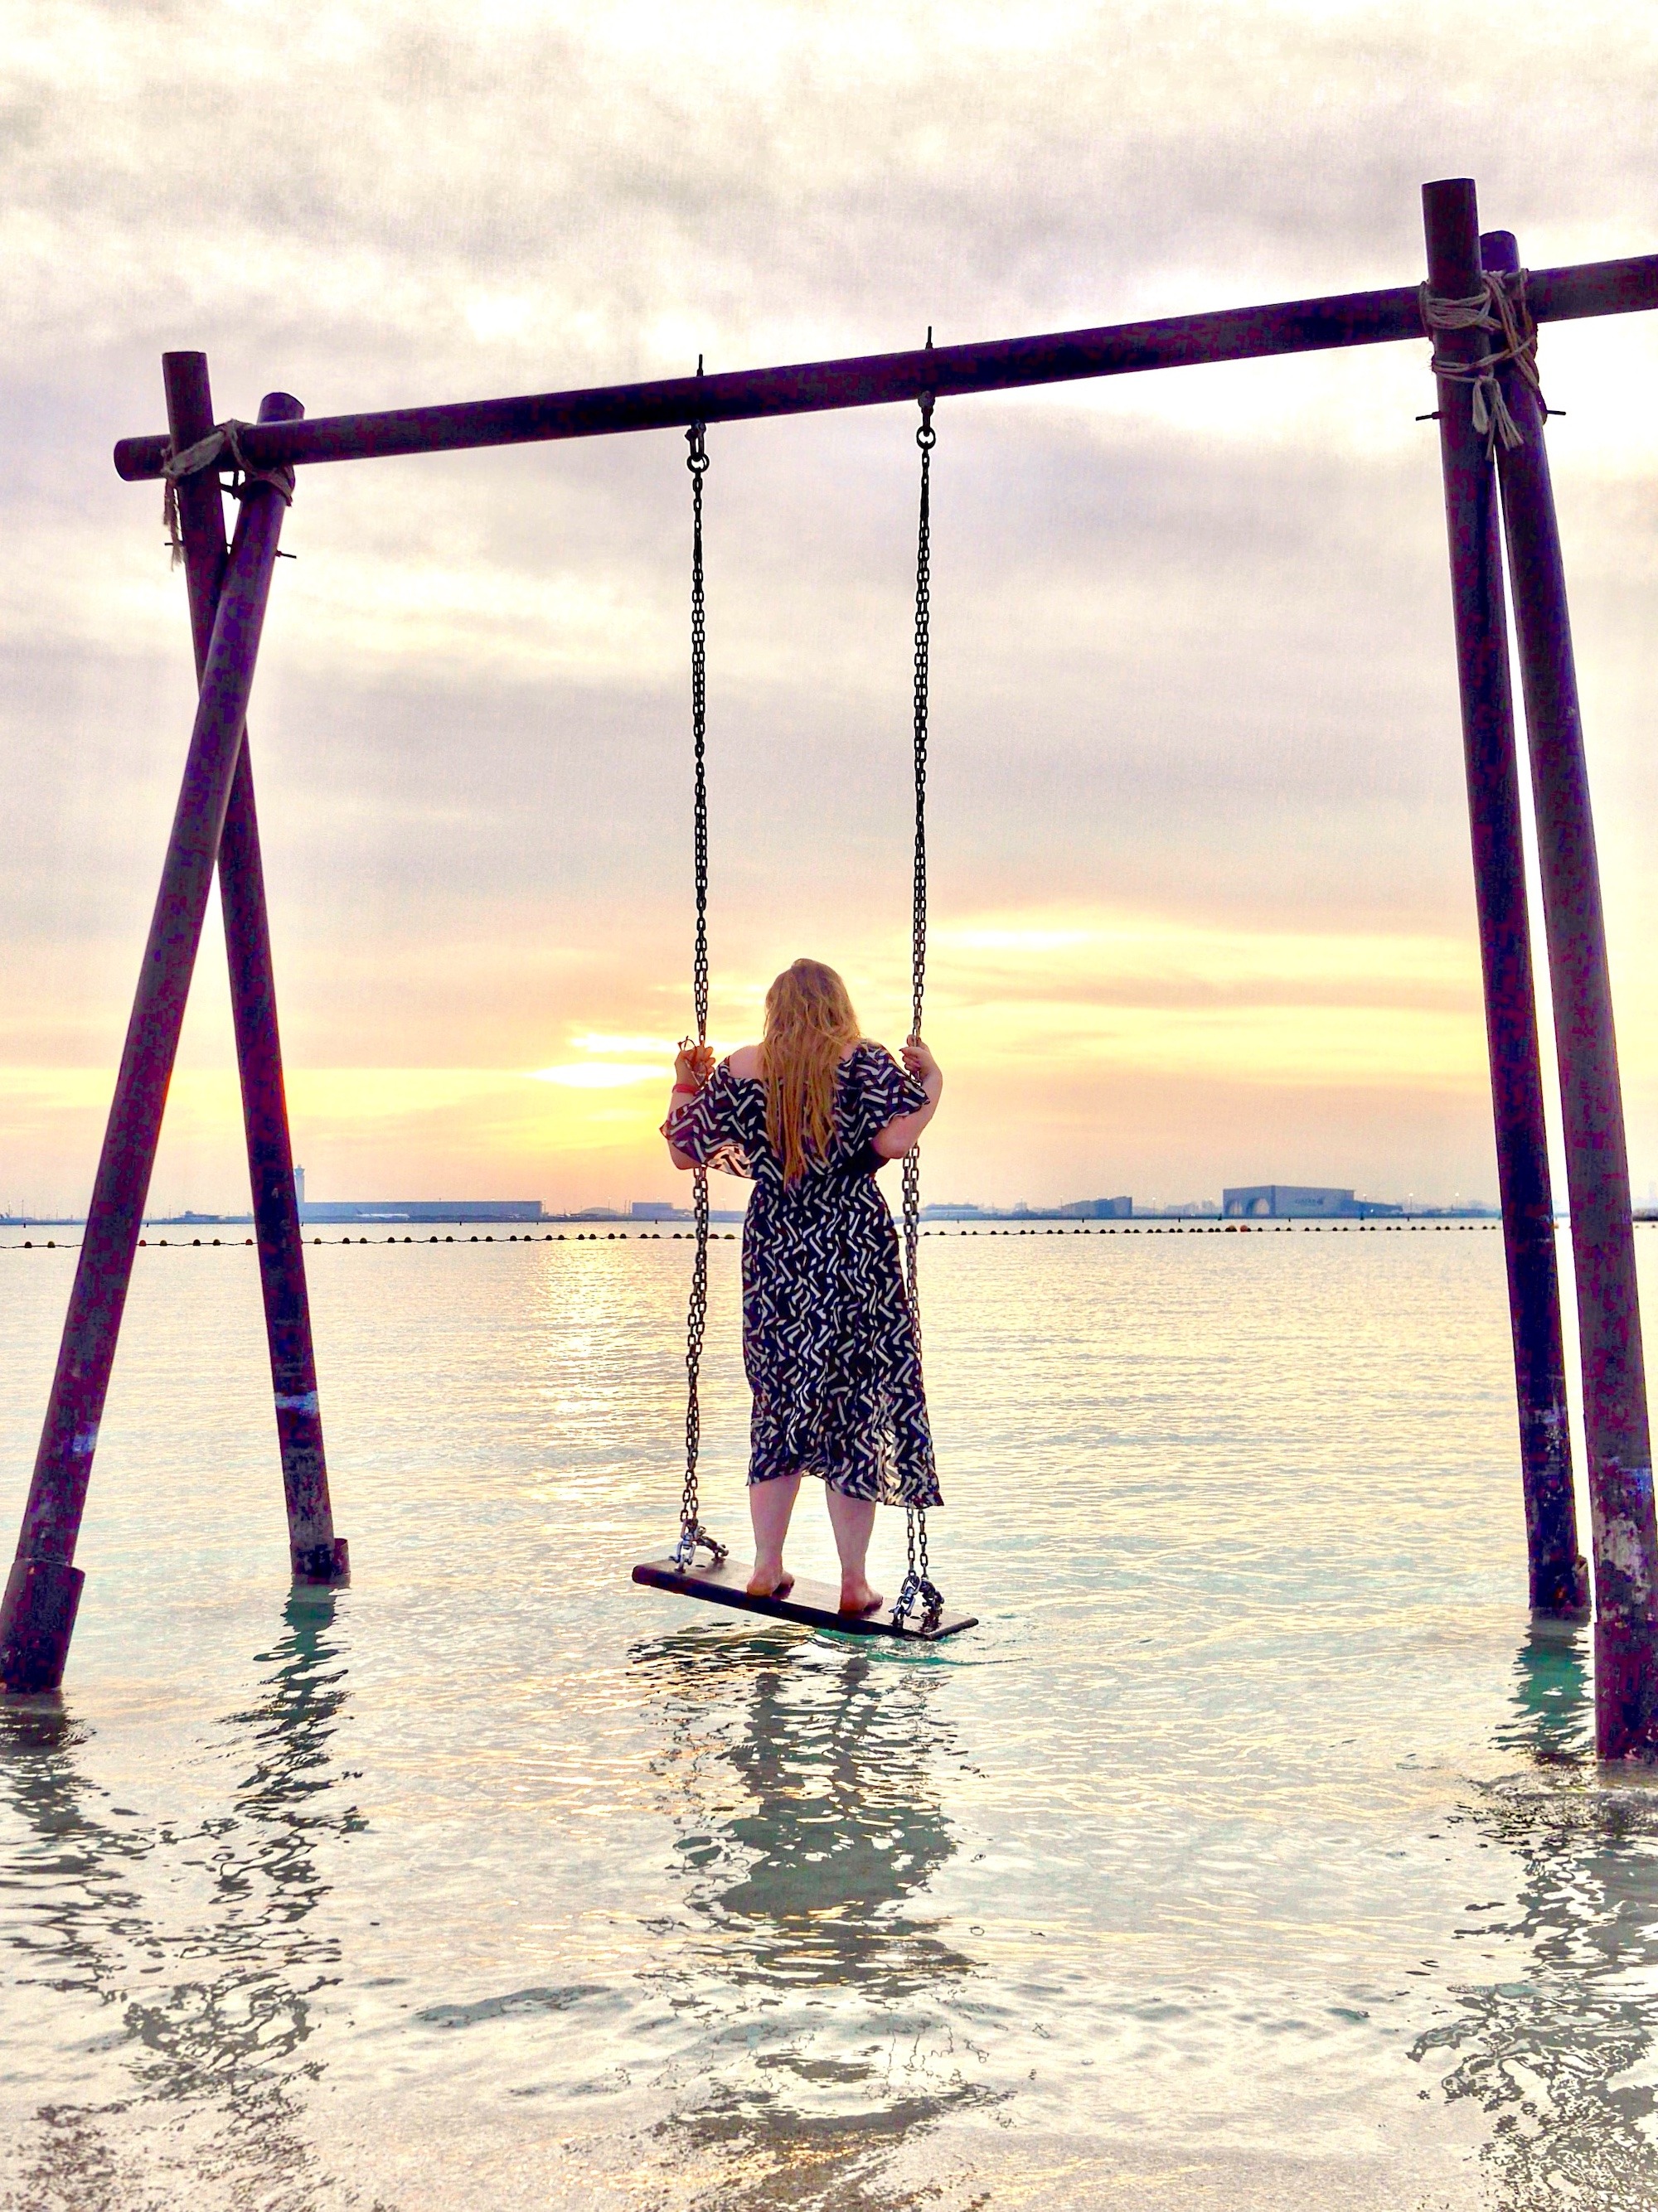 Maldives of Qatar, Banana Island Sea Swing | Visit Qatar | Doha, the capital of Qatar is located in the Middle East and the World Cup 2022 location. Find out how I spent 4 days on my visit to Qatar | Travel Guide & Tips | Elle Blonde Luxury Lifestyle Destination Blog